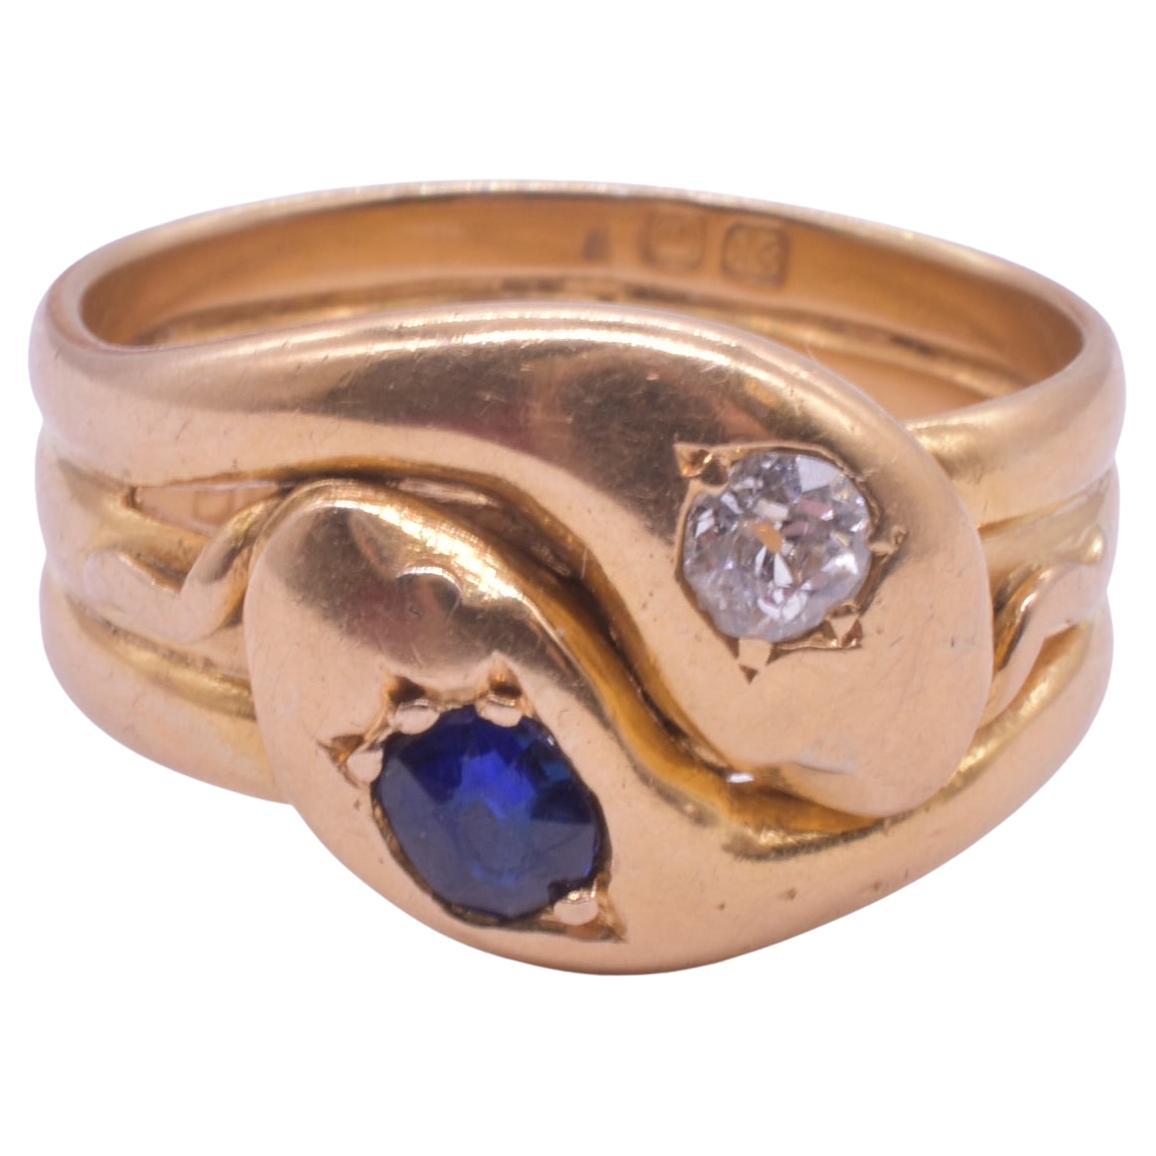 Striking 18K sapphire and diamond double snake ring fully hallmarked for London in 1914 and fabricated in 18K gold. Snake rings became popular in England when Queen Victoria received an emerald snake ring as her engagement ring from Prince Albert.